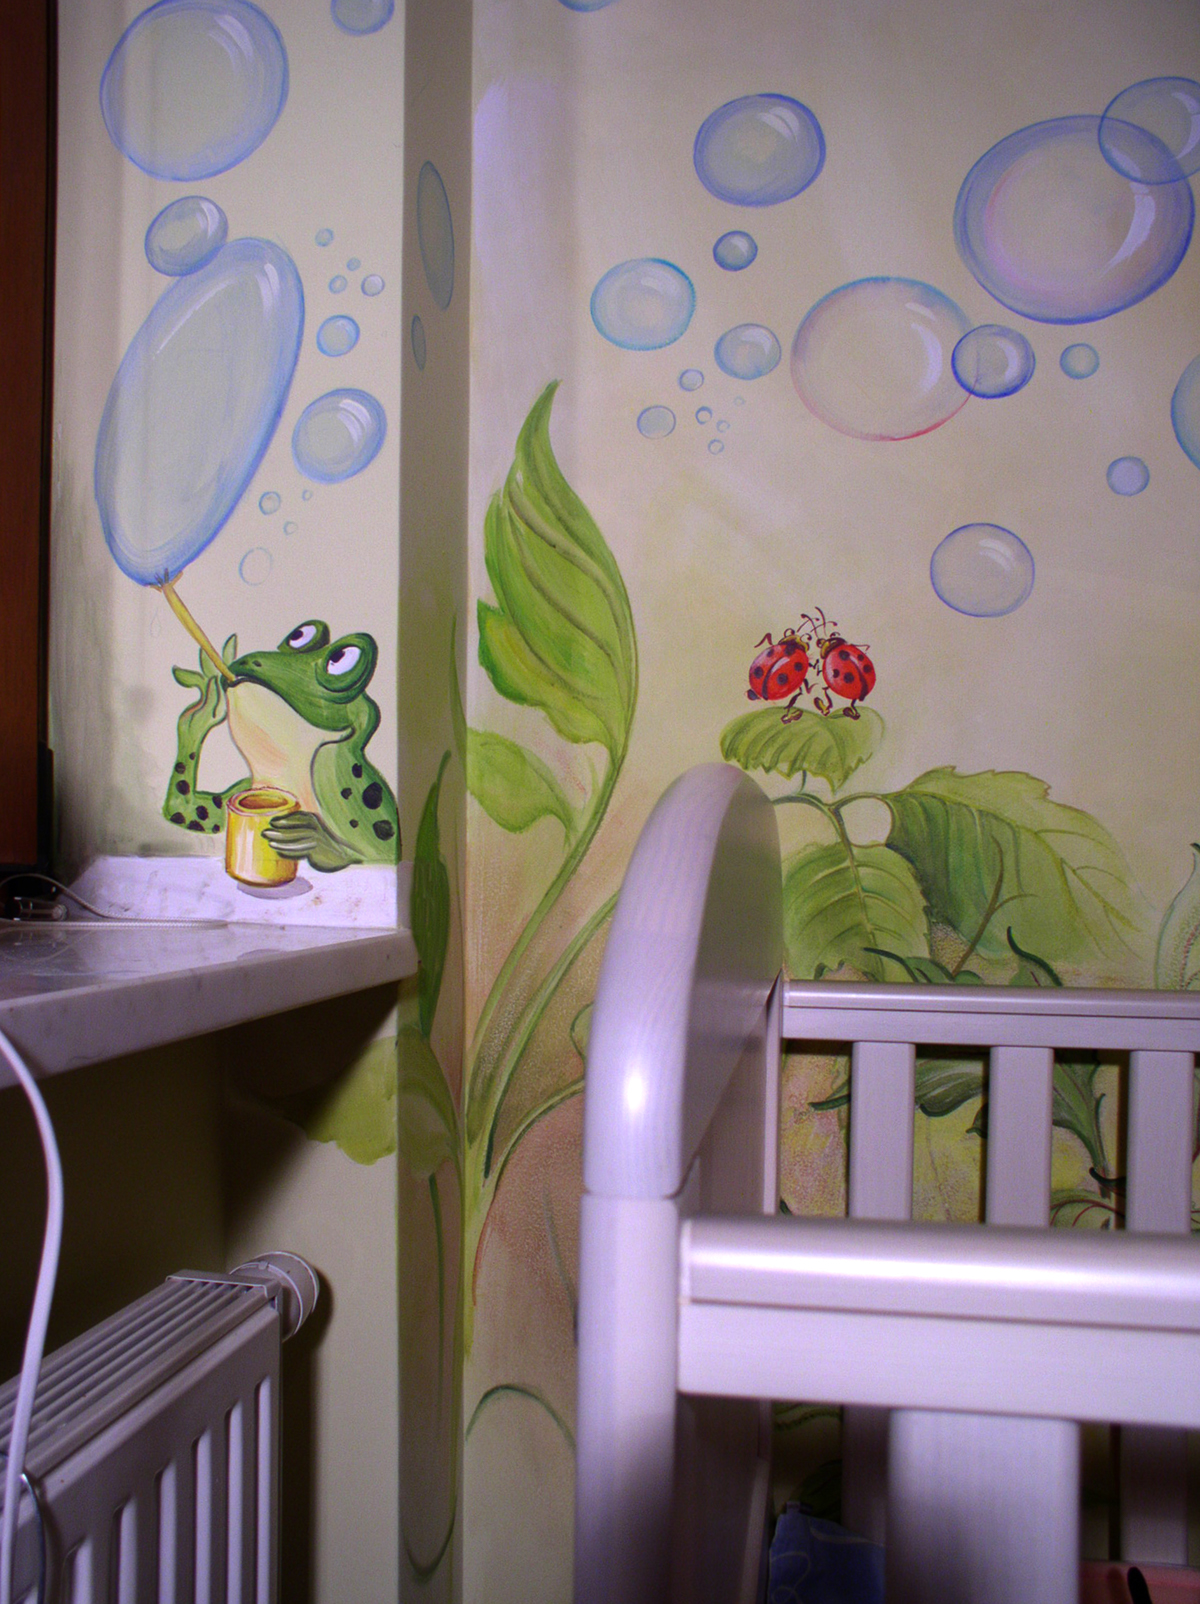 wall art wall painting Mural child's room for children interior design  Window dwarf frog fairytale